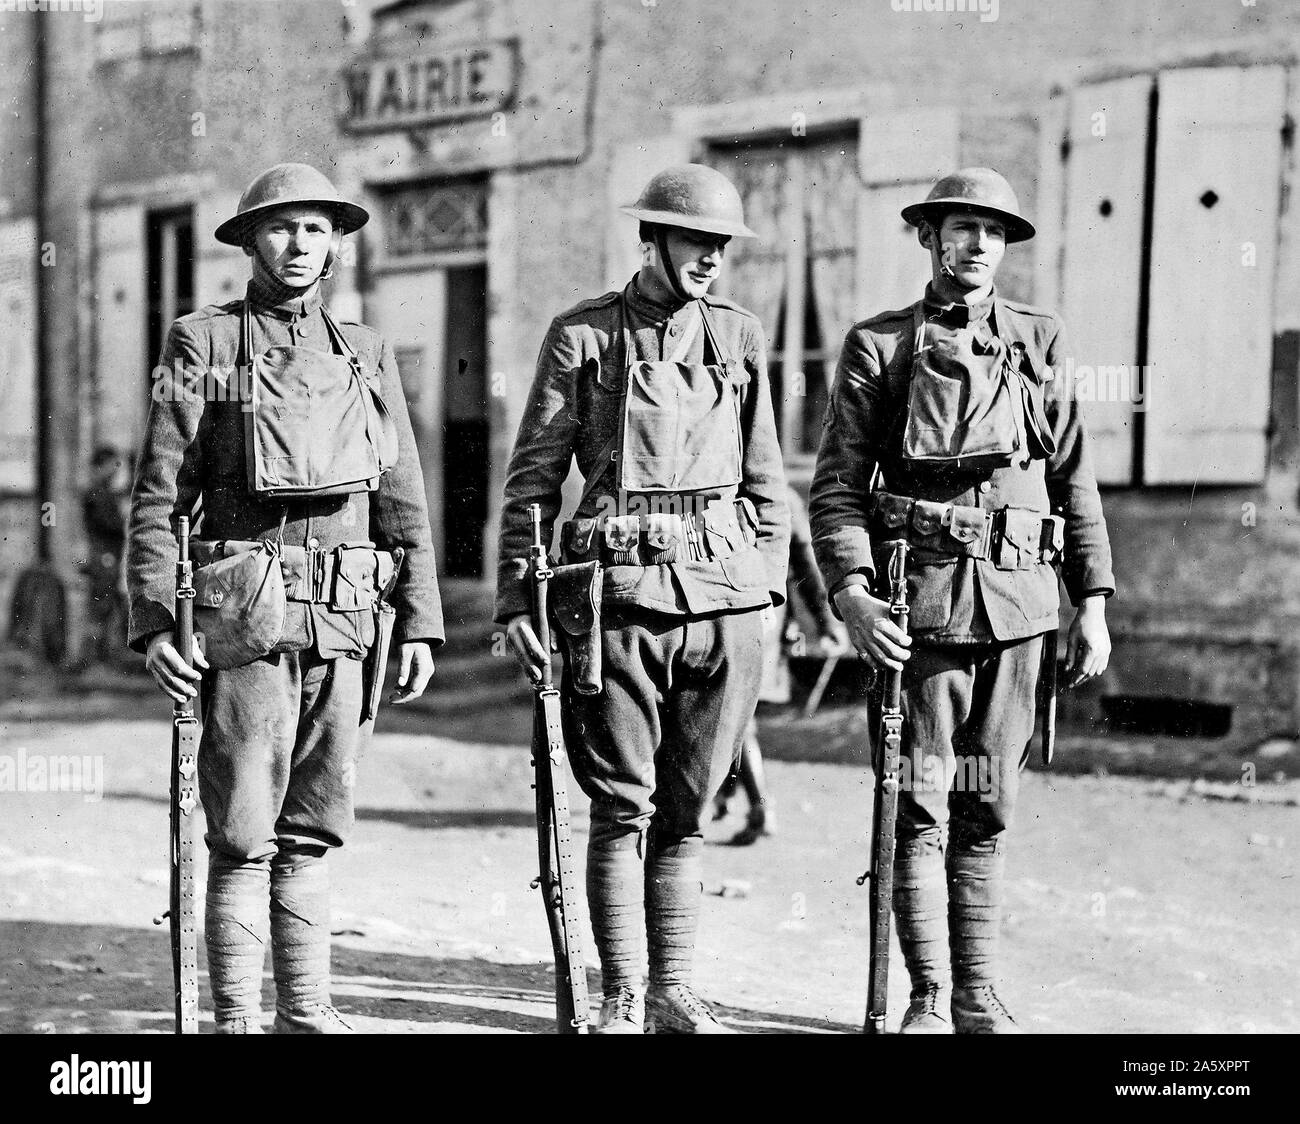 A Successful Patrol- Three men of a patrol of 5 who met a German patrol of 10 men, with no loss- The German losses were 2 killed, 2 wounded, and 2 captured ca. March 1918 in Glenville France Stock Photo